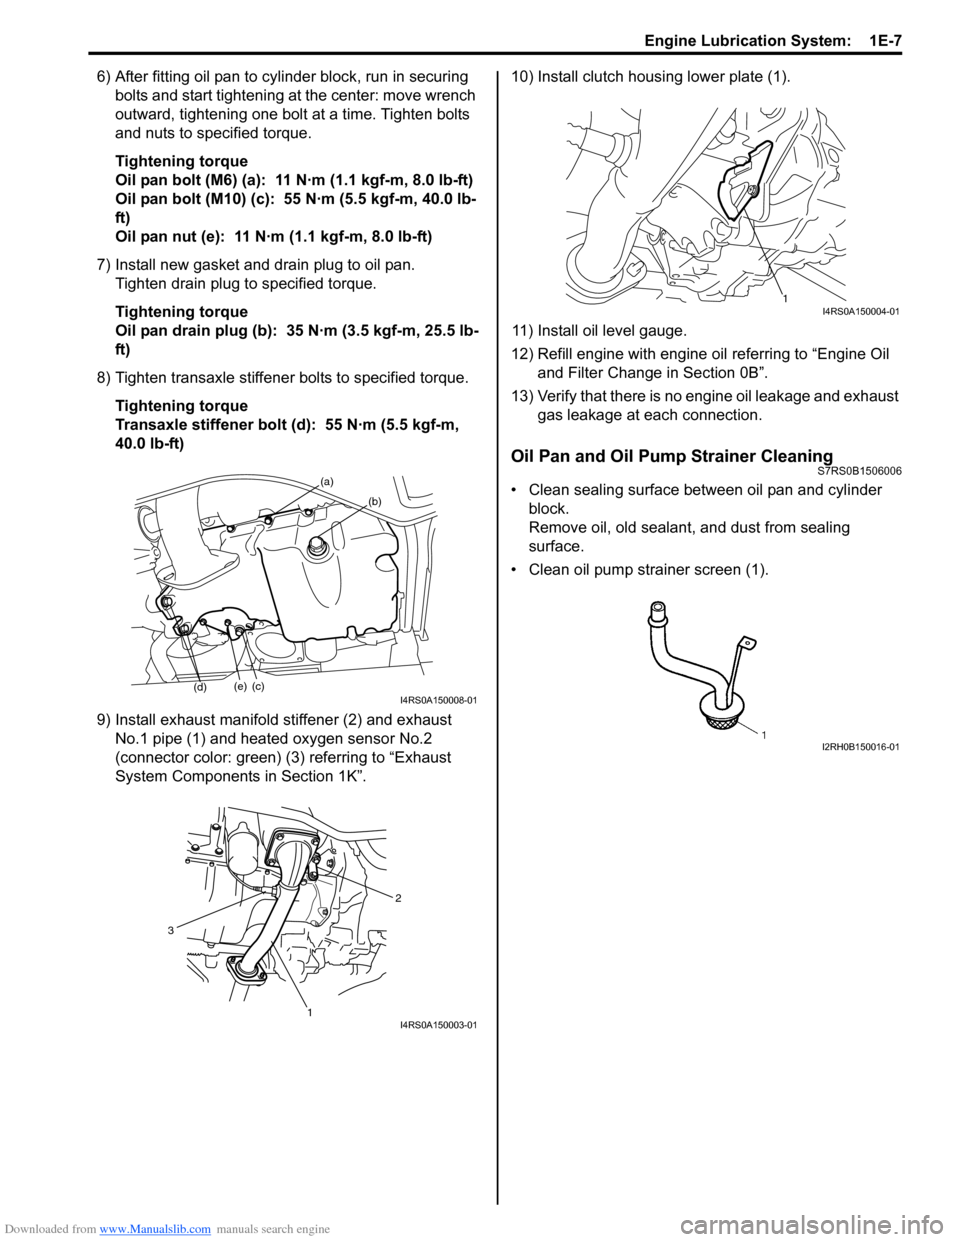 SUZUKI SWIFT 2005 2.G Service Owners Manual Downloaded from www.Manualslib.com manuals search engine Engine Lubrication System:  1E-7
6) After fitting oil pan to cylinder block, run in securing bolts and start tightening at the center: move wre